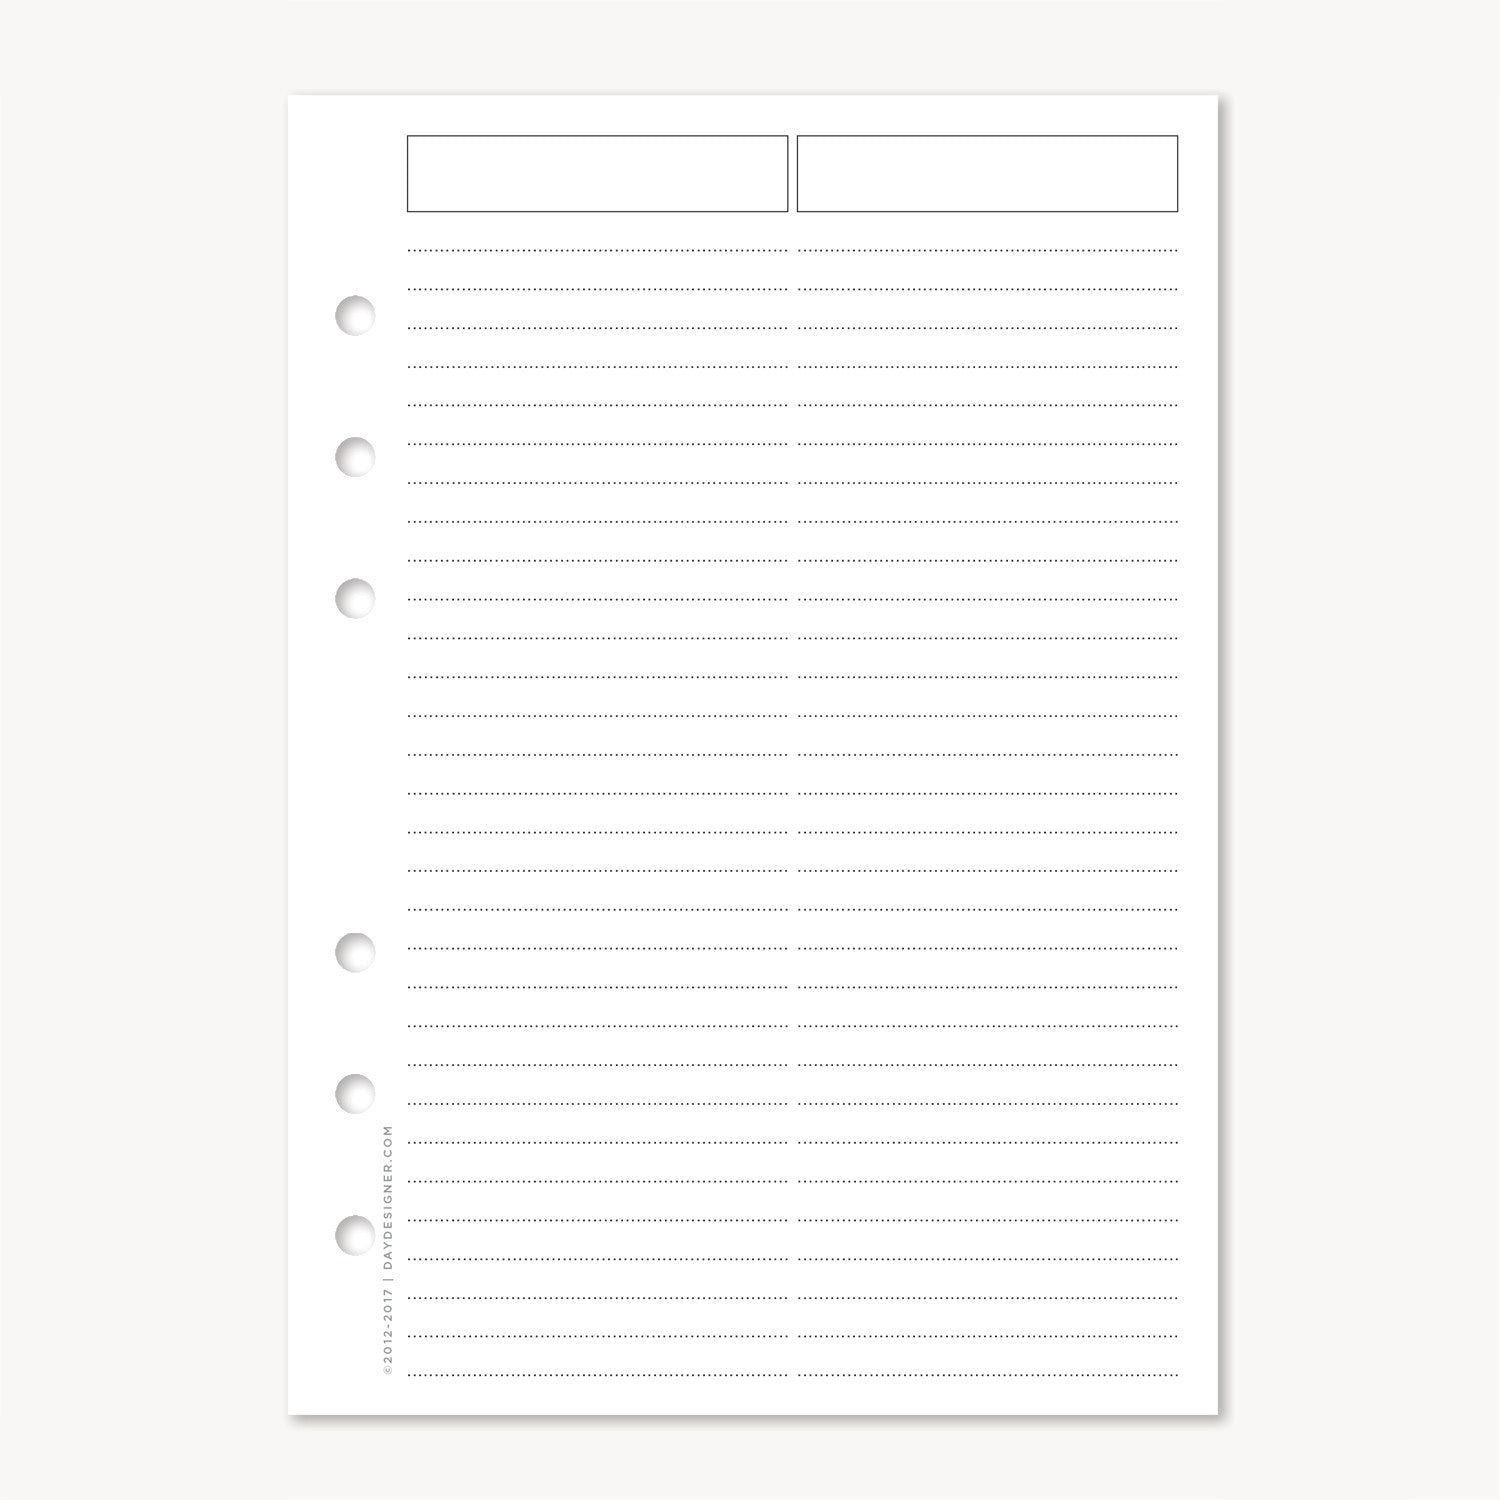 Lined Paper refills